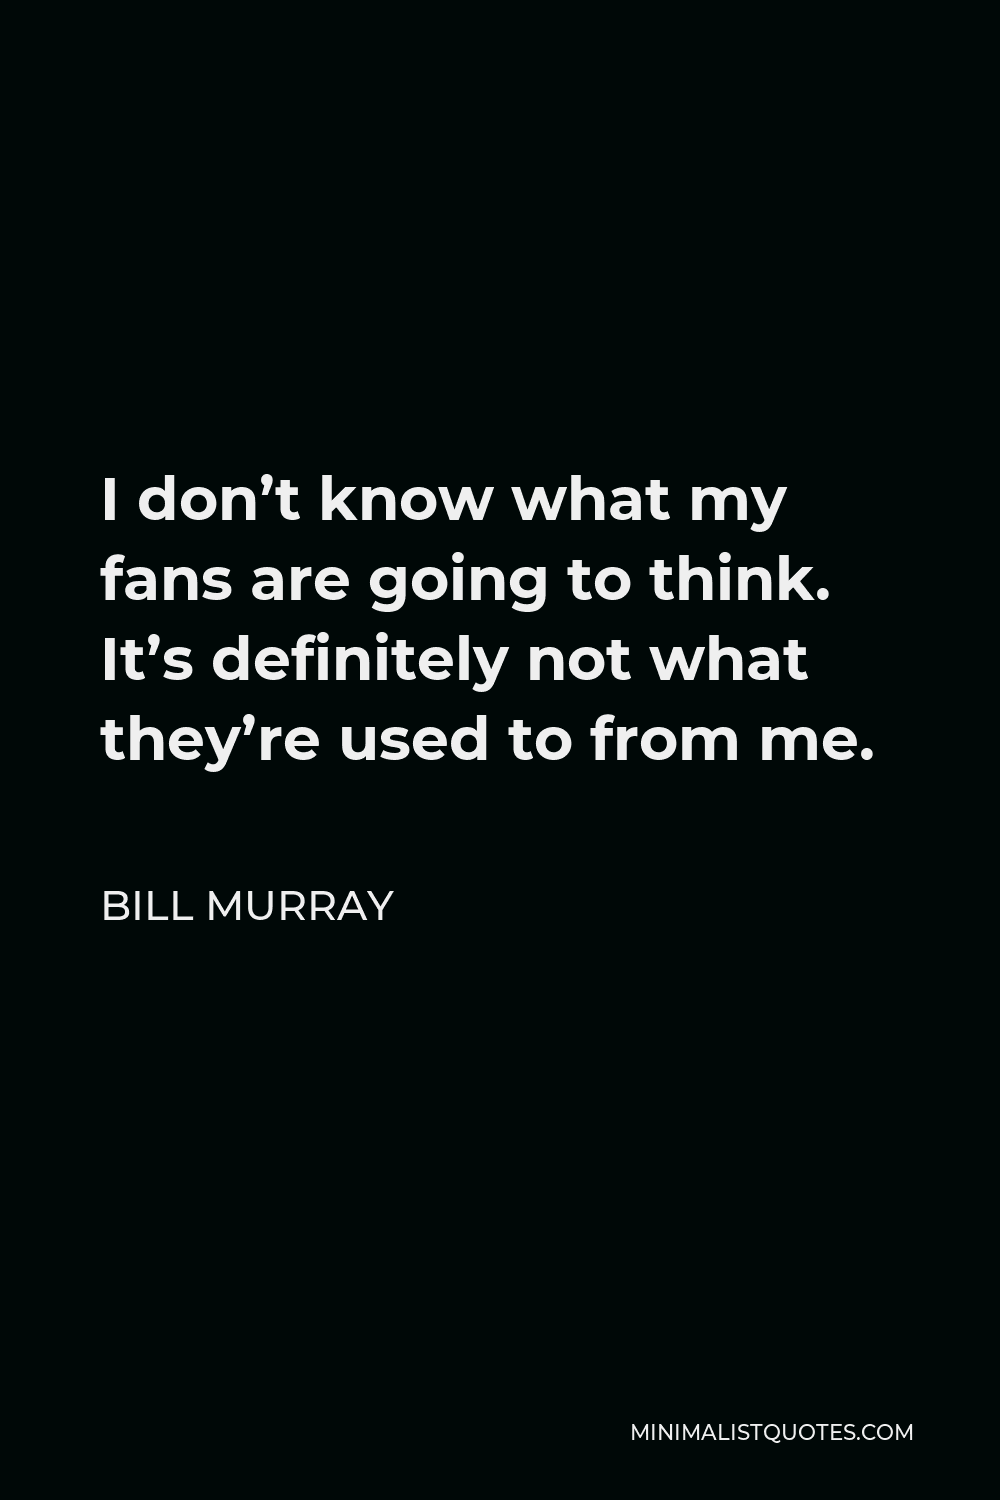 Bill Murray Quote - I don’t know what my fans are going to think. It’s definitely not what they’re used to from me.